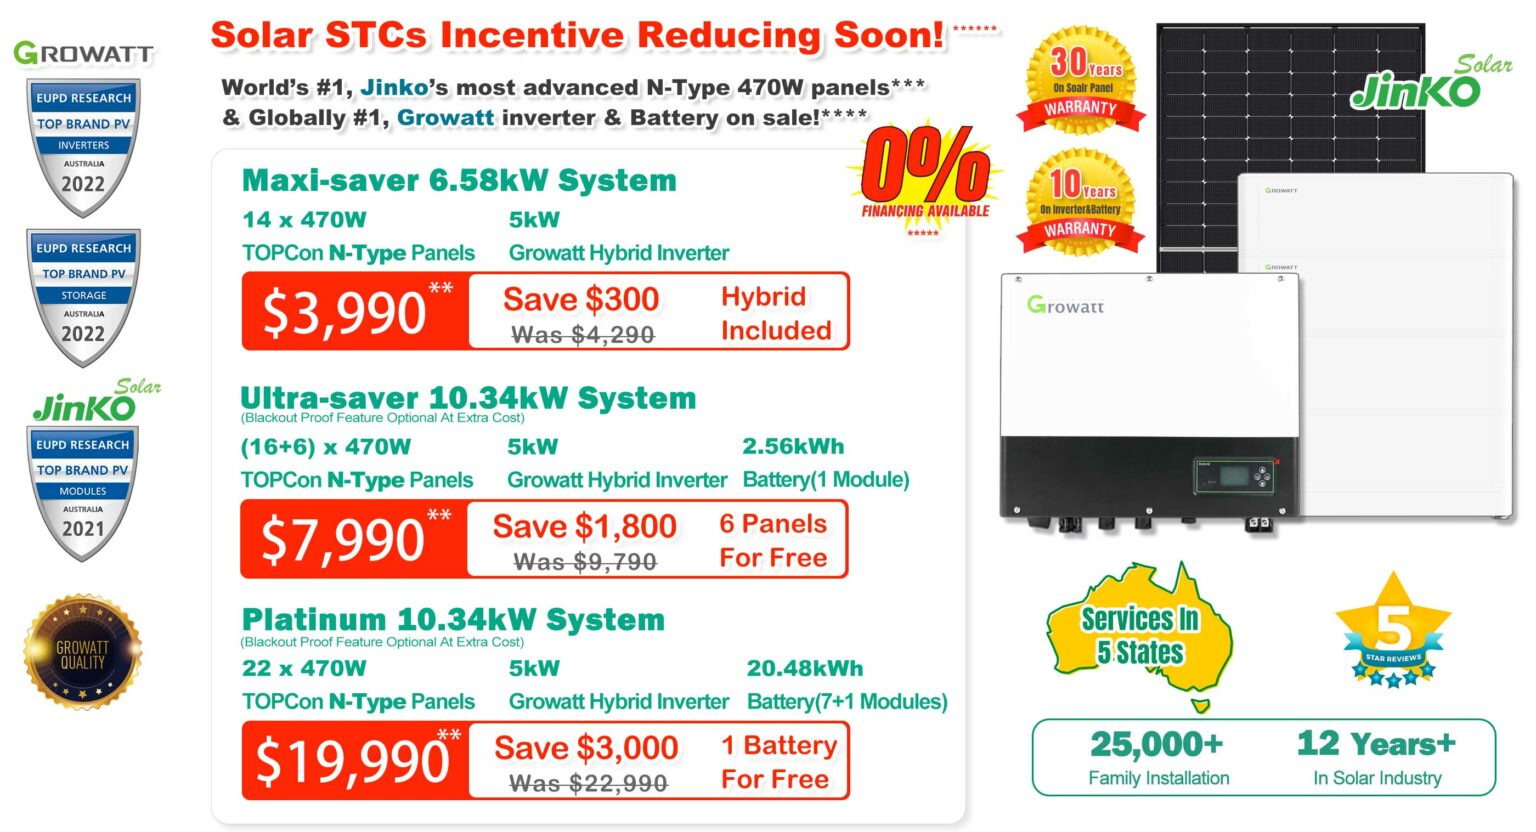 nsw-solar-rebates-government-incentives-in-2022-powerrebate